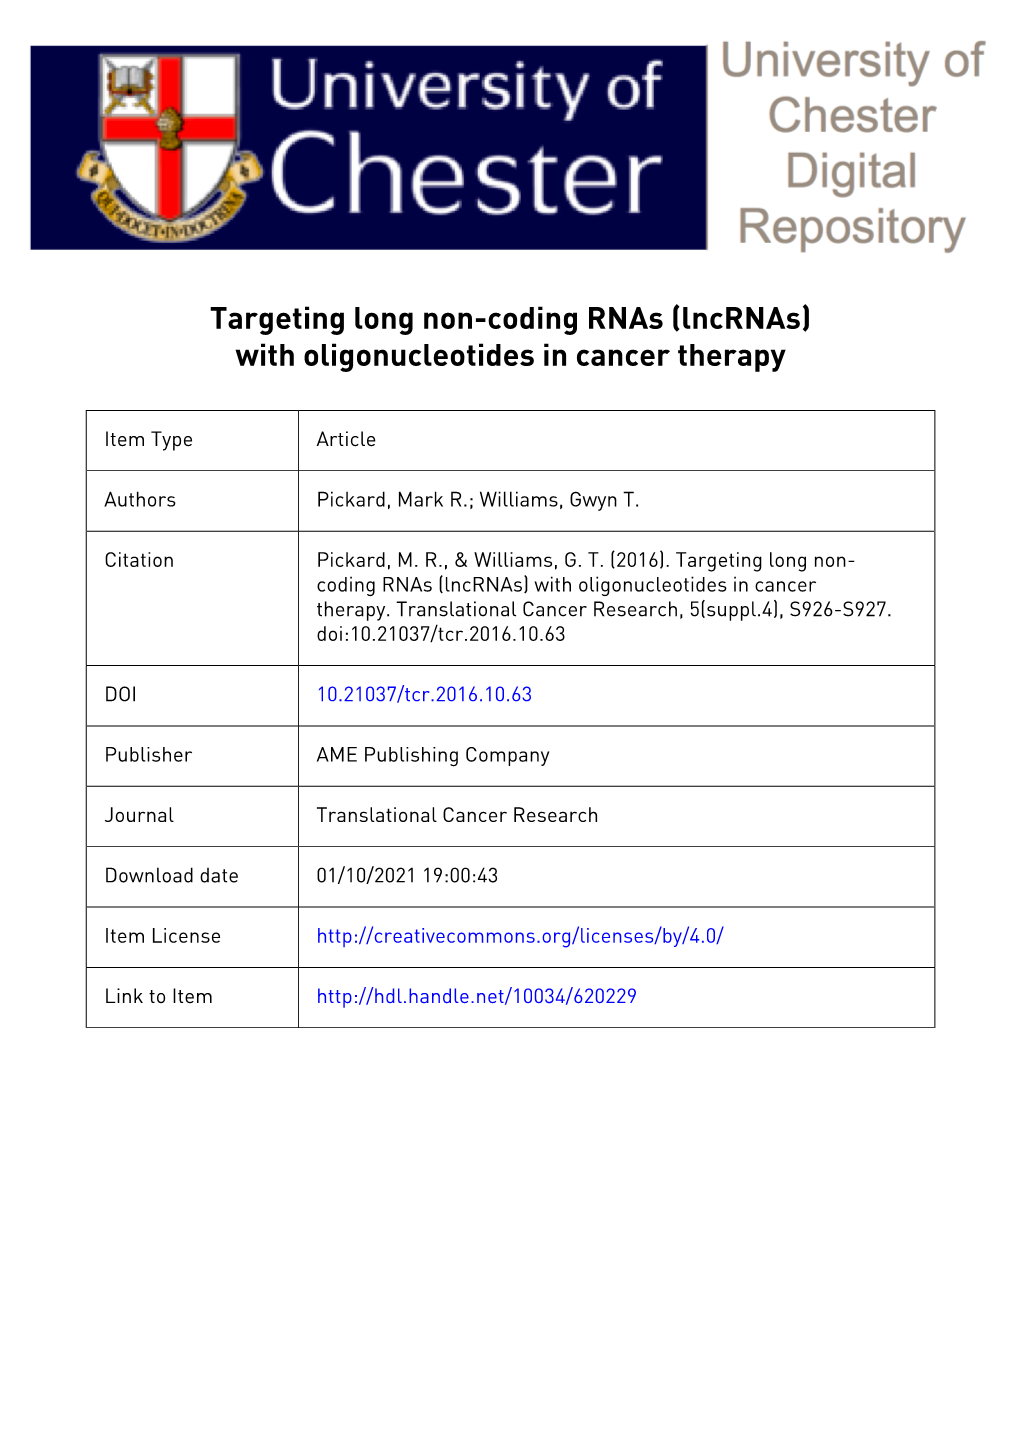 With Oligonucleotides in Cancer Therapy